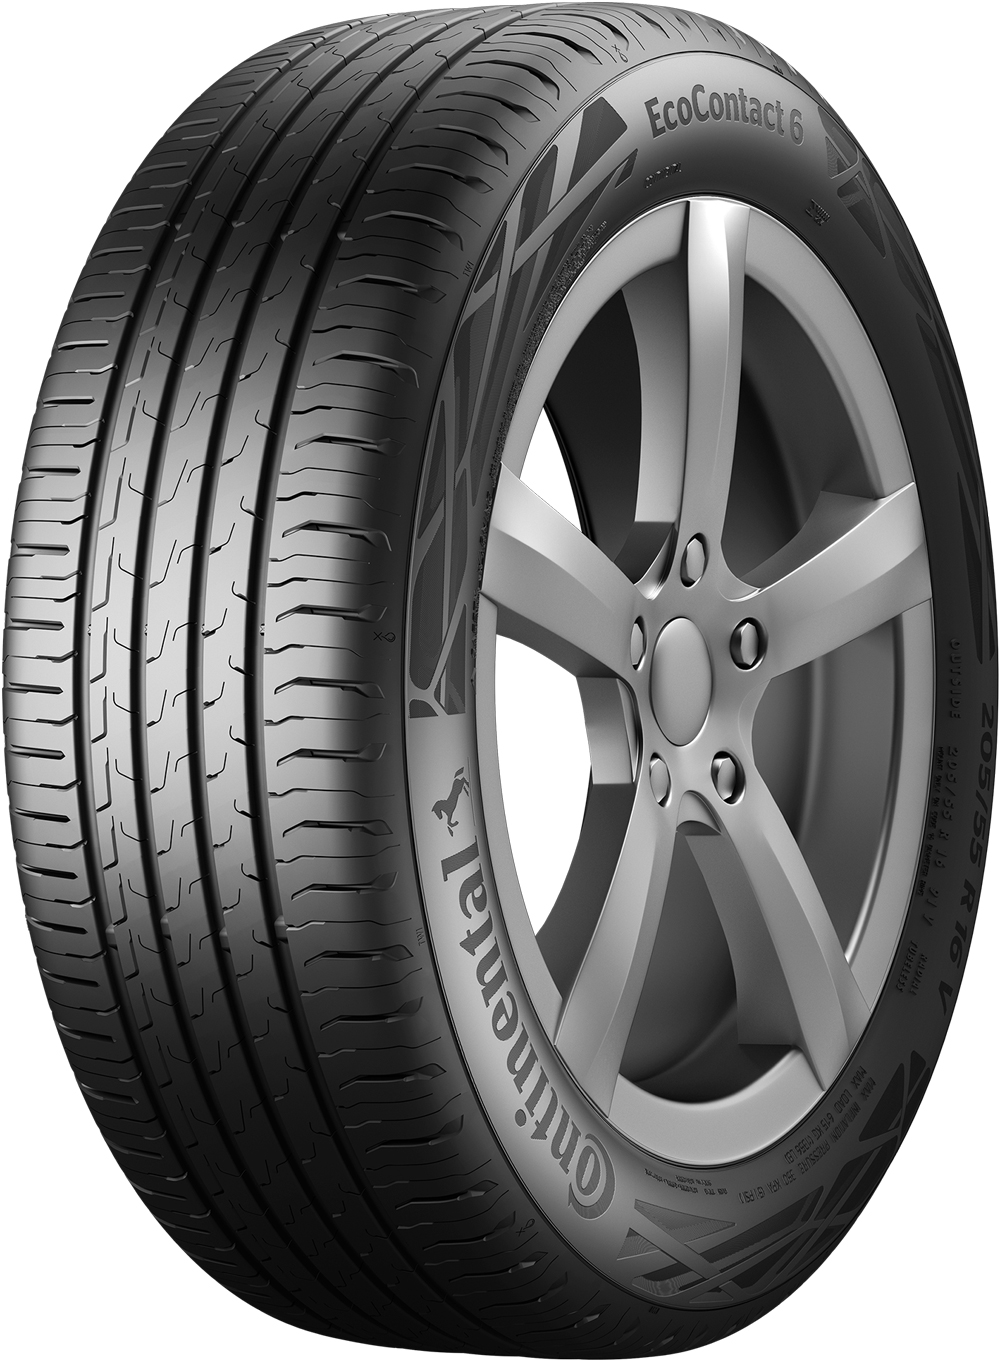 Anvelope auto CONTINENTAL Eco Contact 6 SSR XL RFT BMW 225/45 R19 96